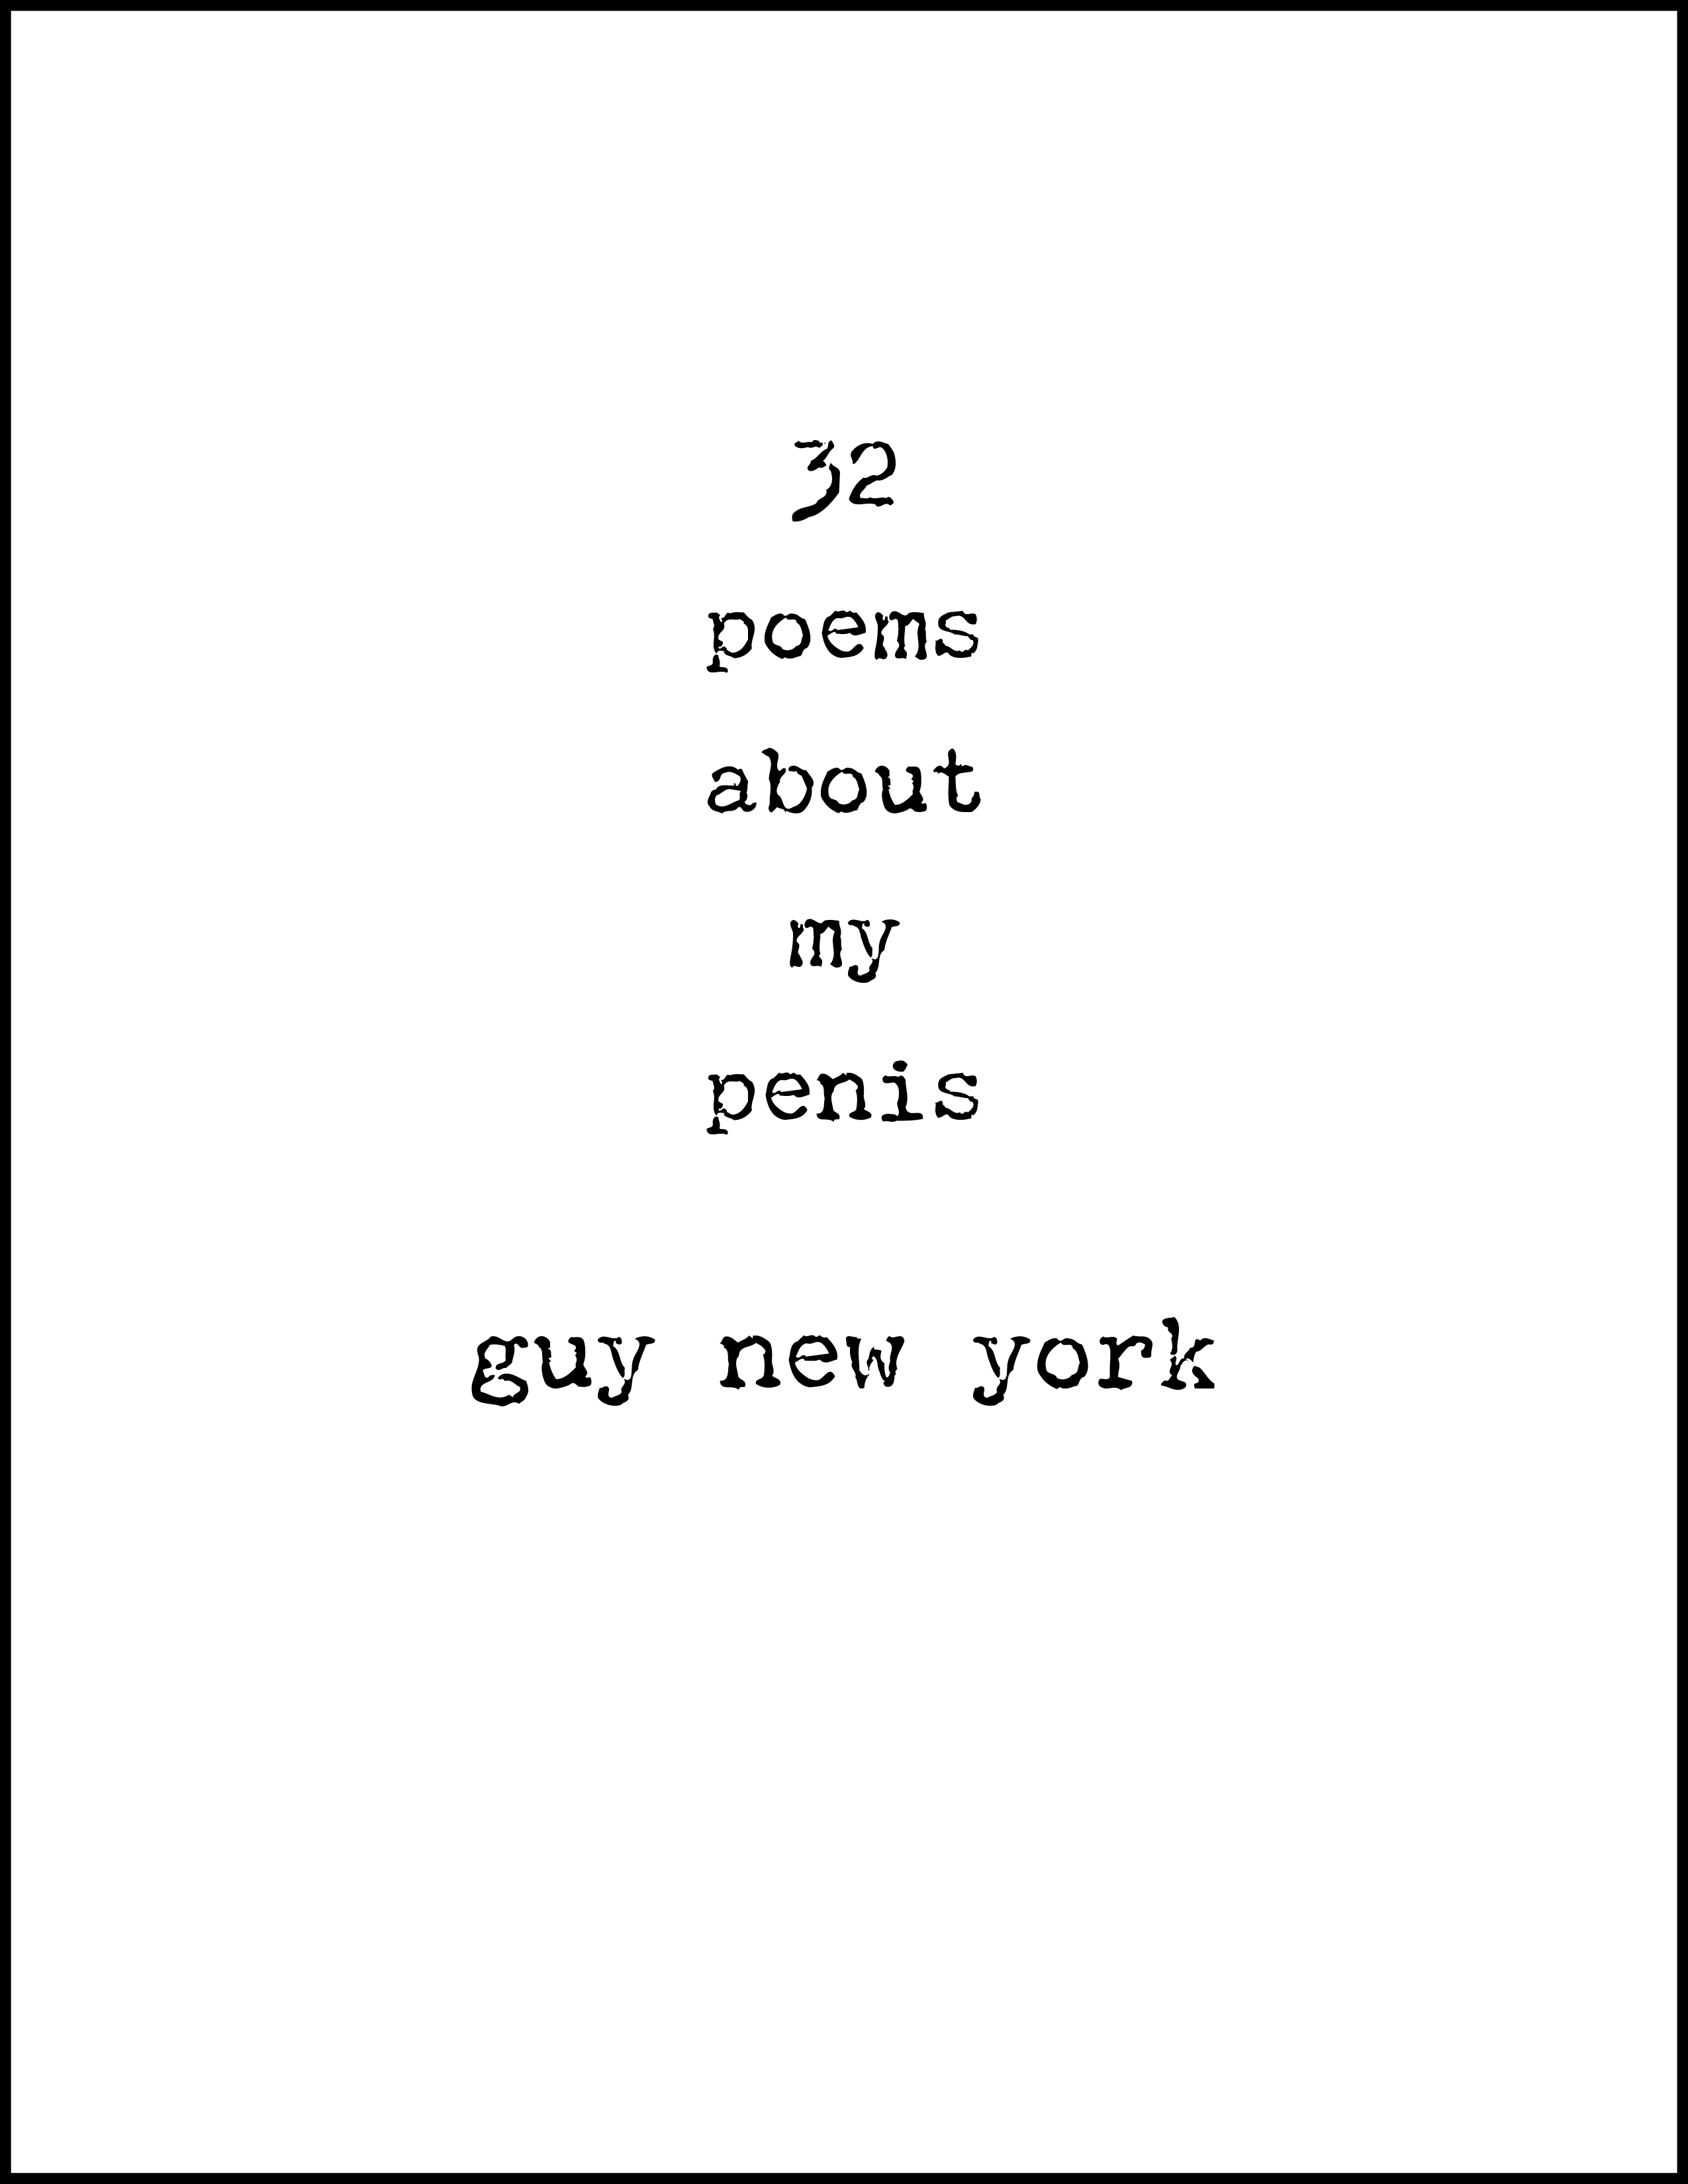 Nobel P. reccomend Poetry about threesomes